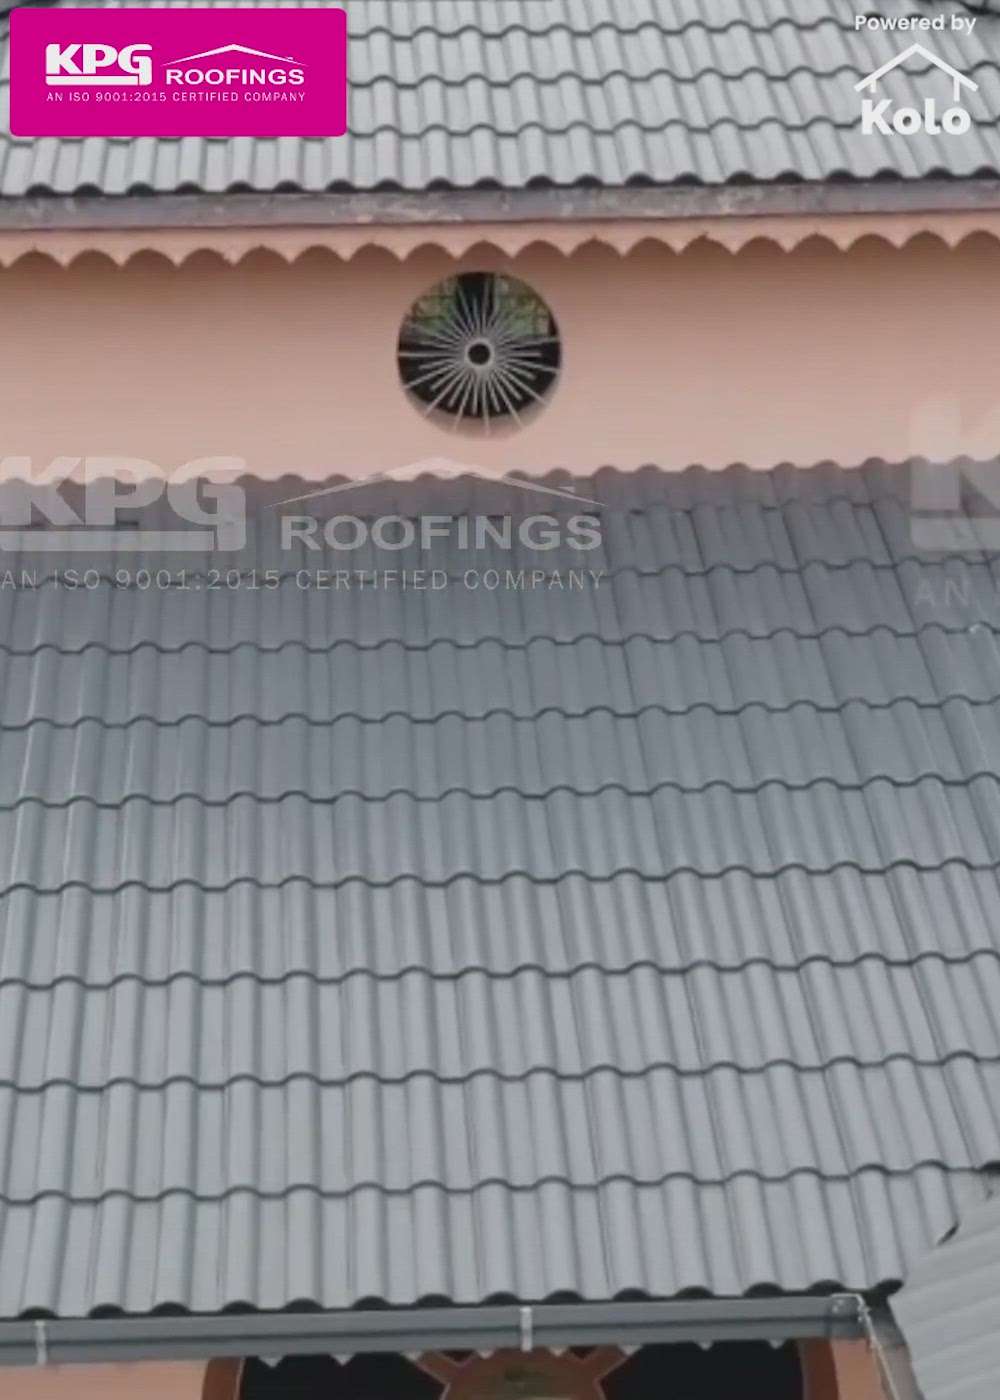 Beautiful roof tiles radiates style and class along with keeping your homes cool

#kpgroofings #updateyourhome #homedecor #kpg #roofingtile #tiles #homeroof #RoofingIdeas #kpgroofs #homerooofing #roof